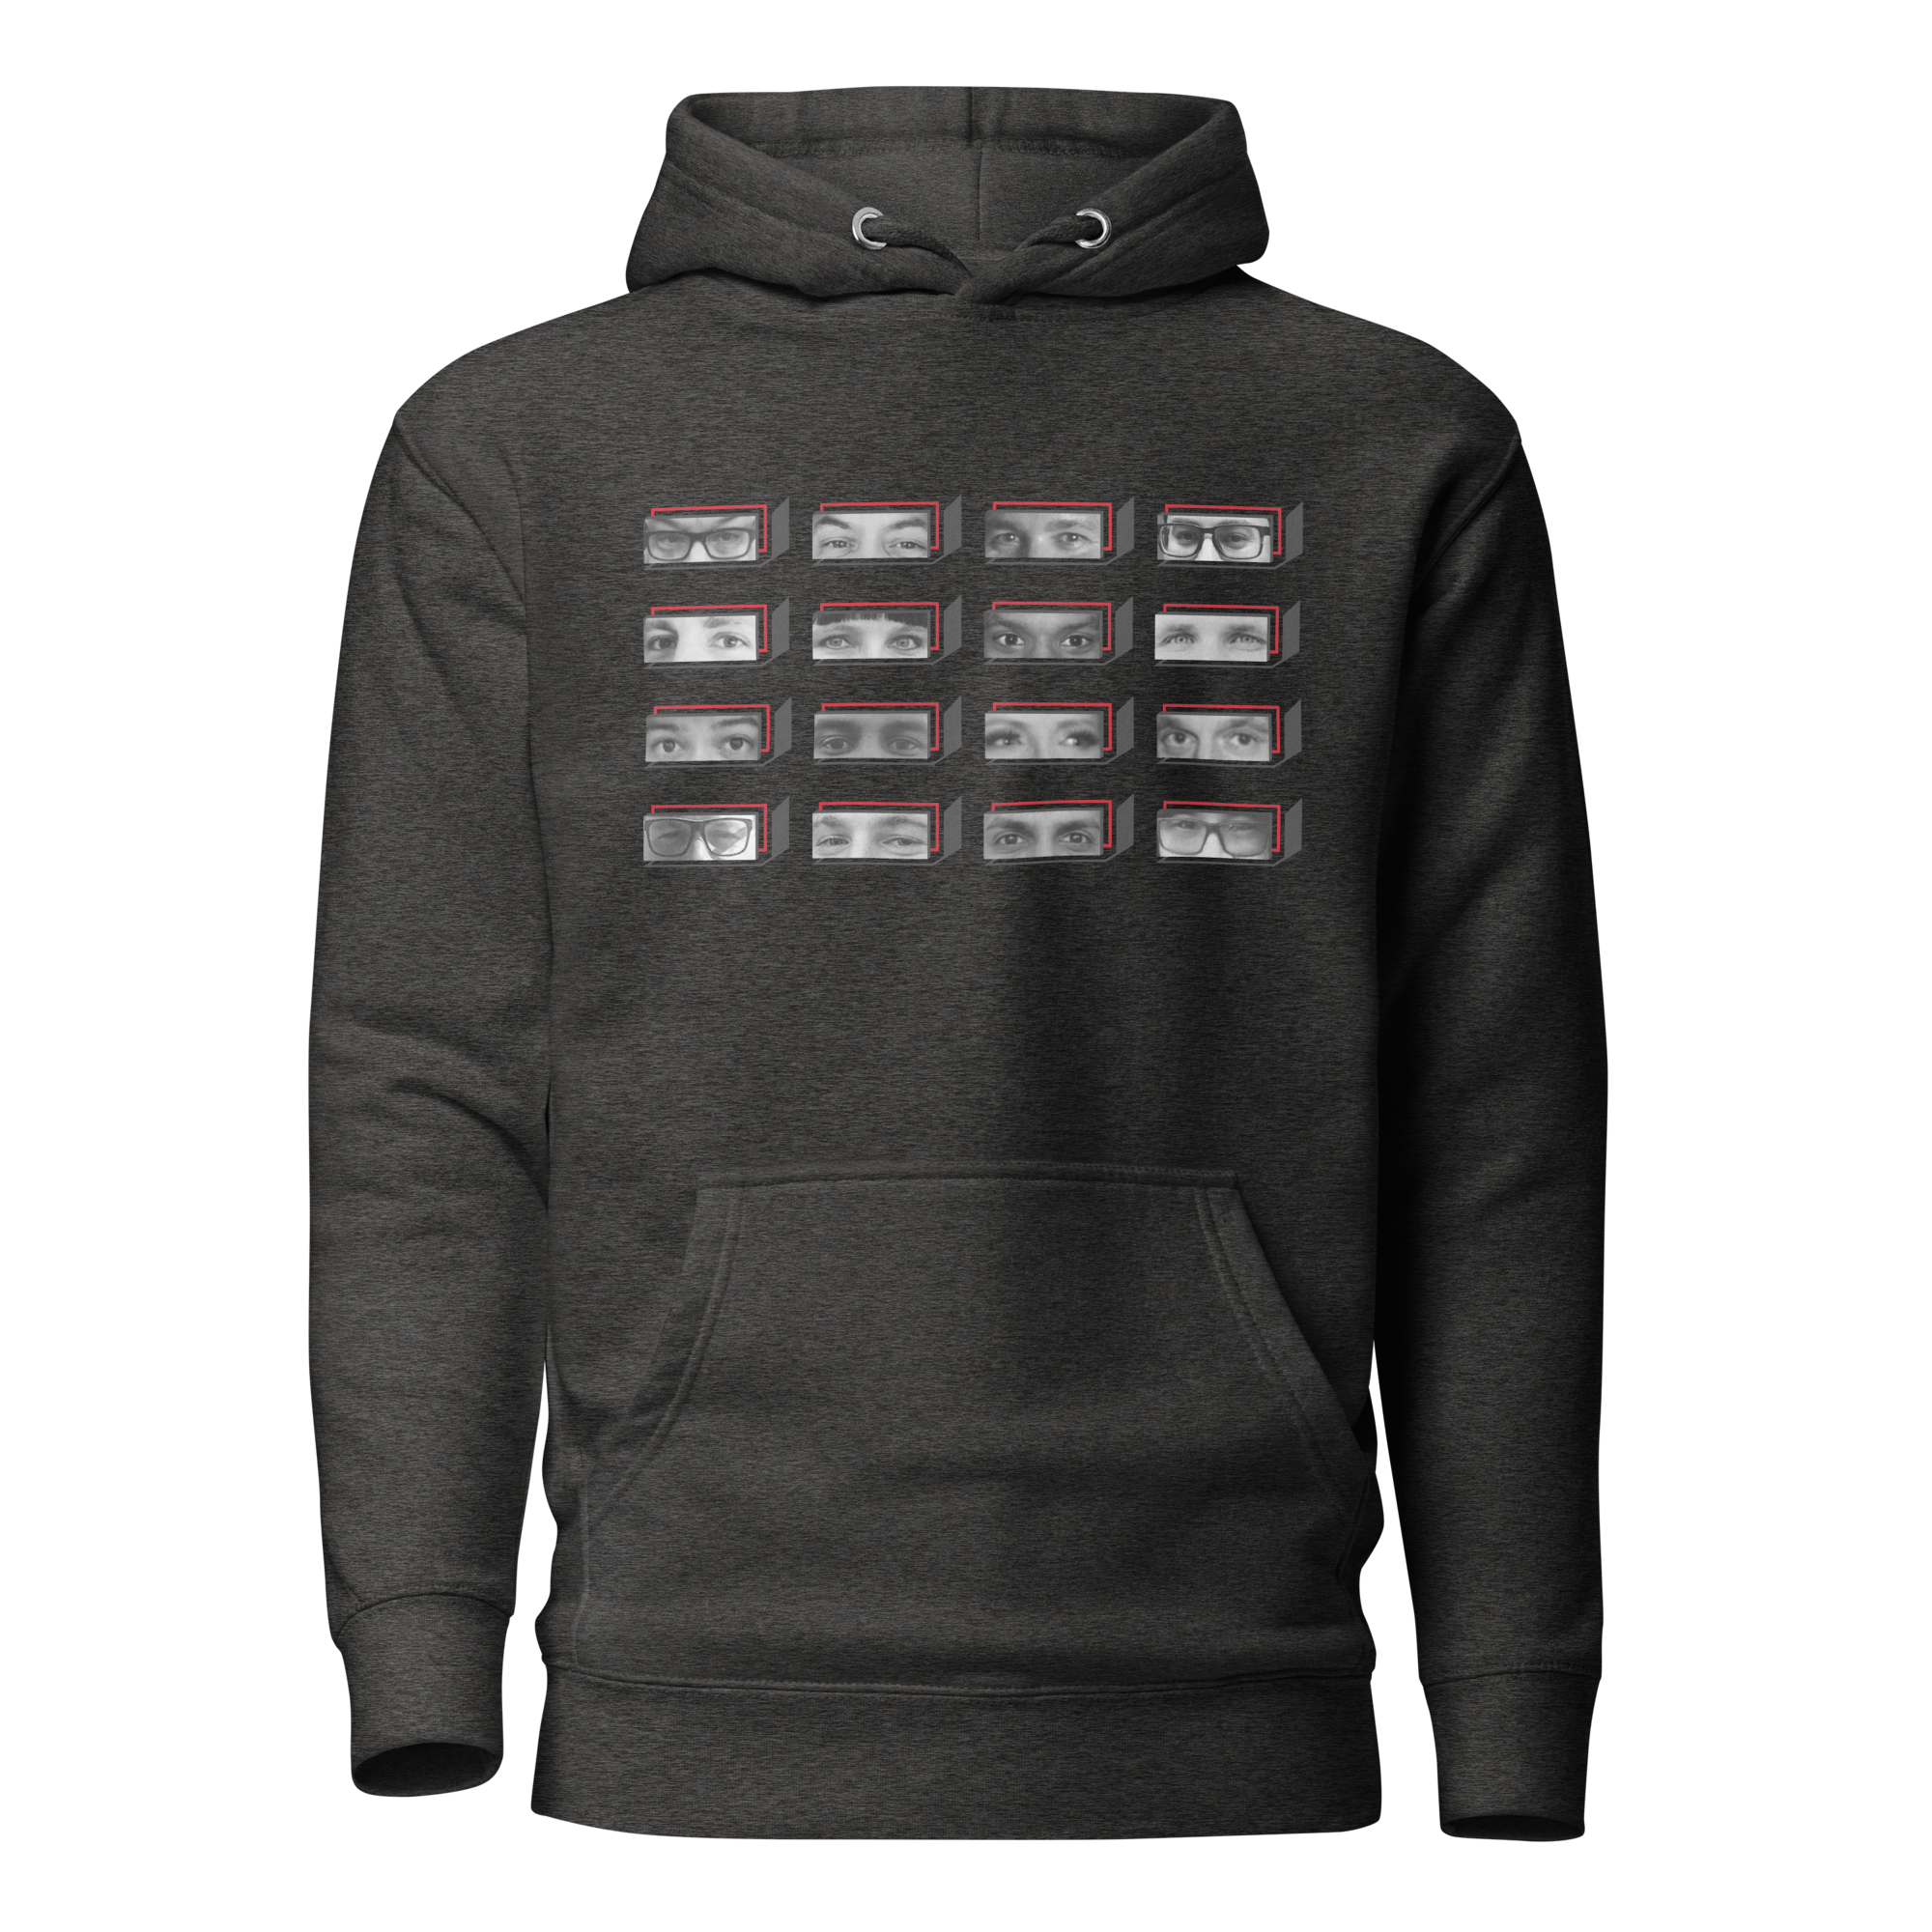 Charcoal Heather LTHM Essentials 4 Graphic Hoodie Front View